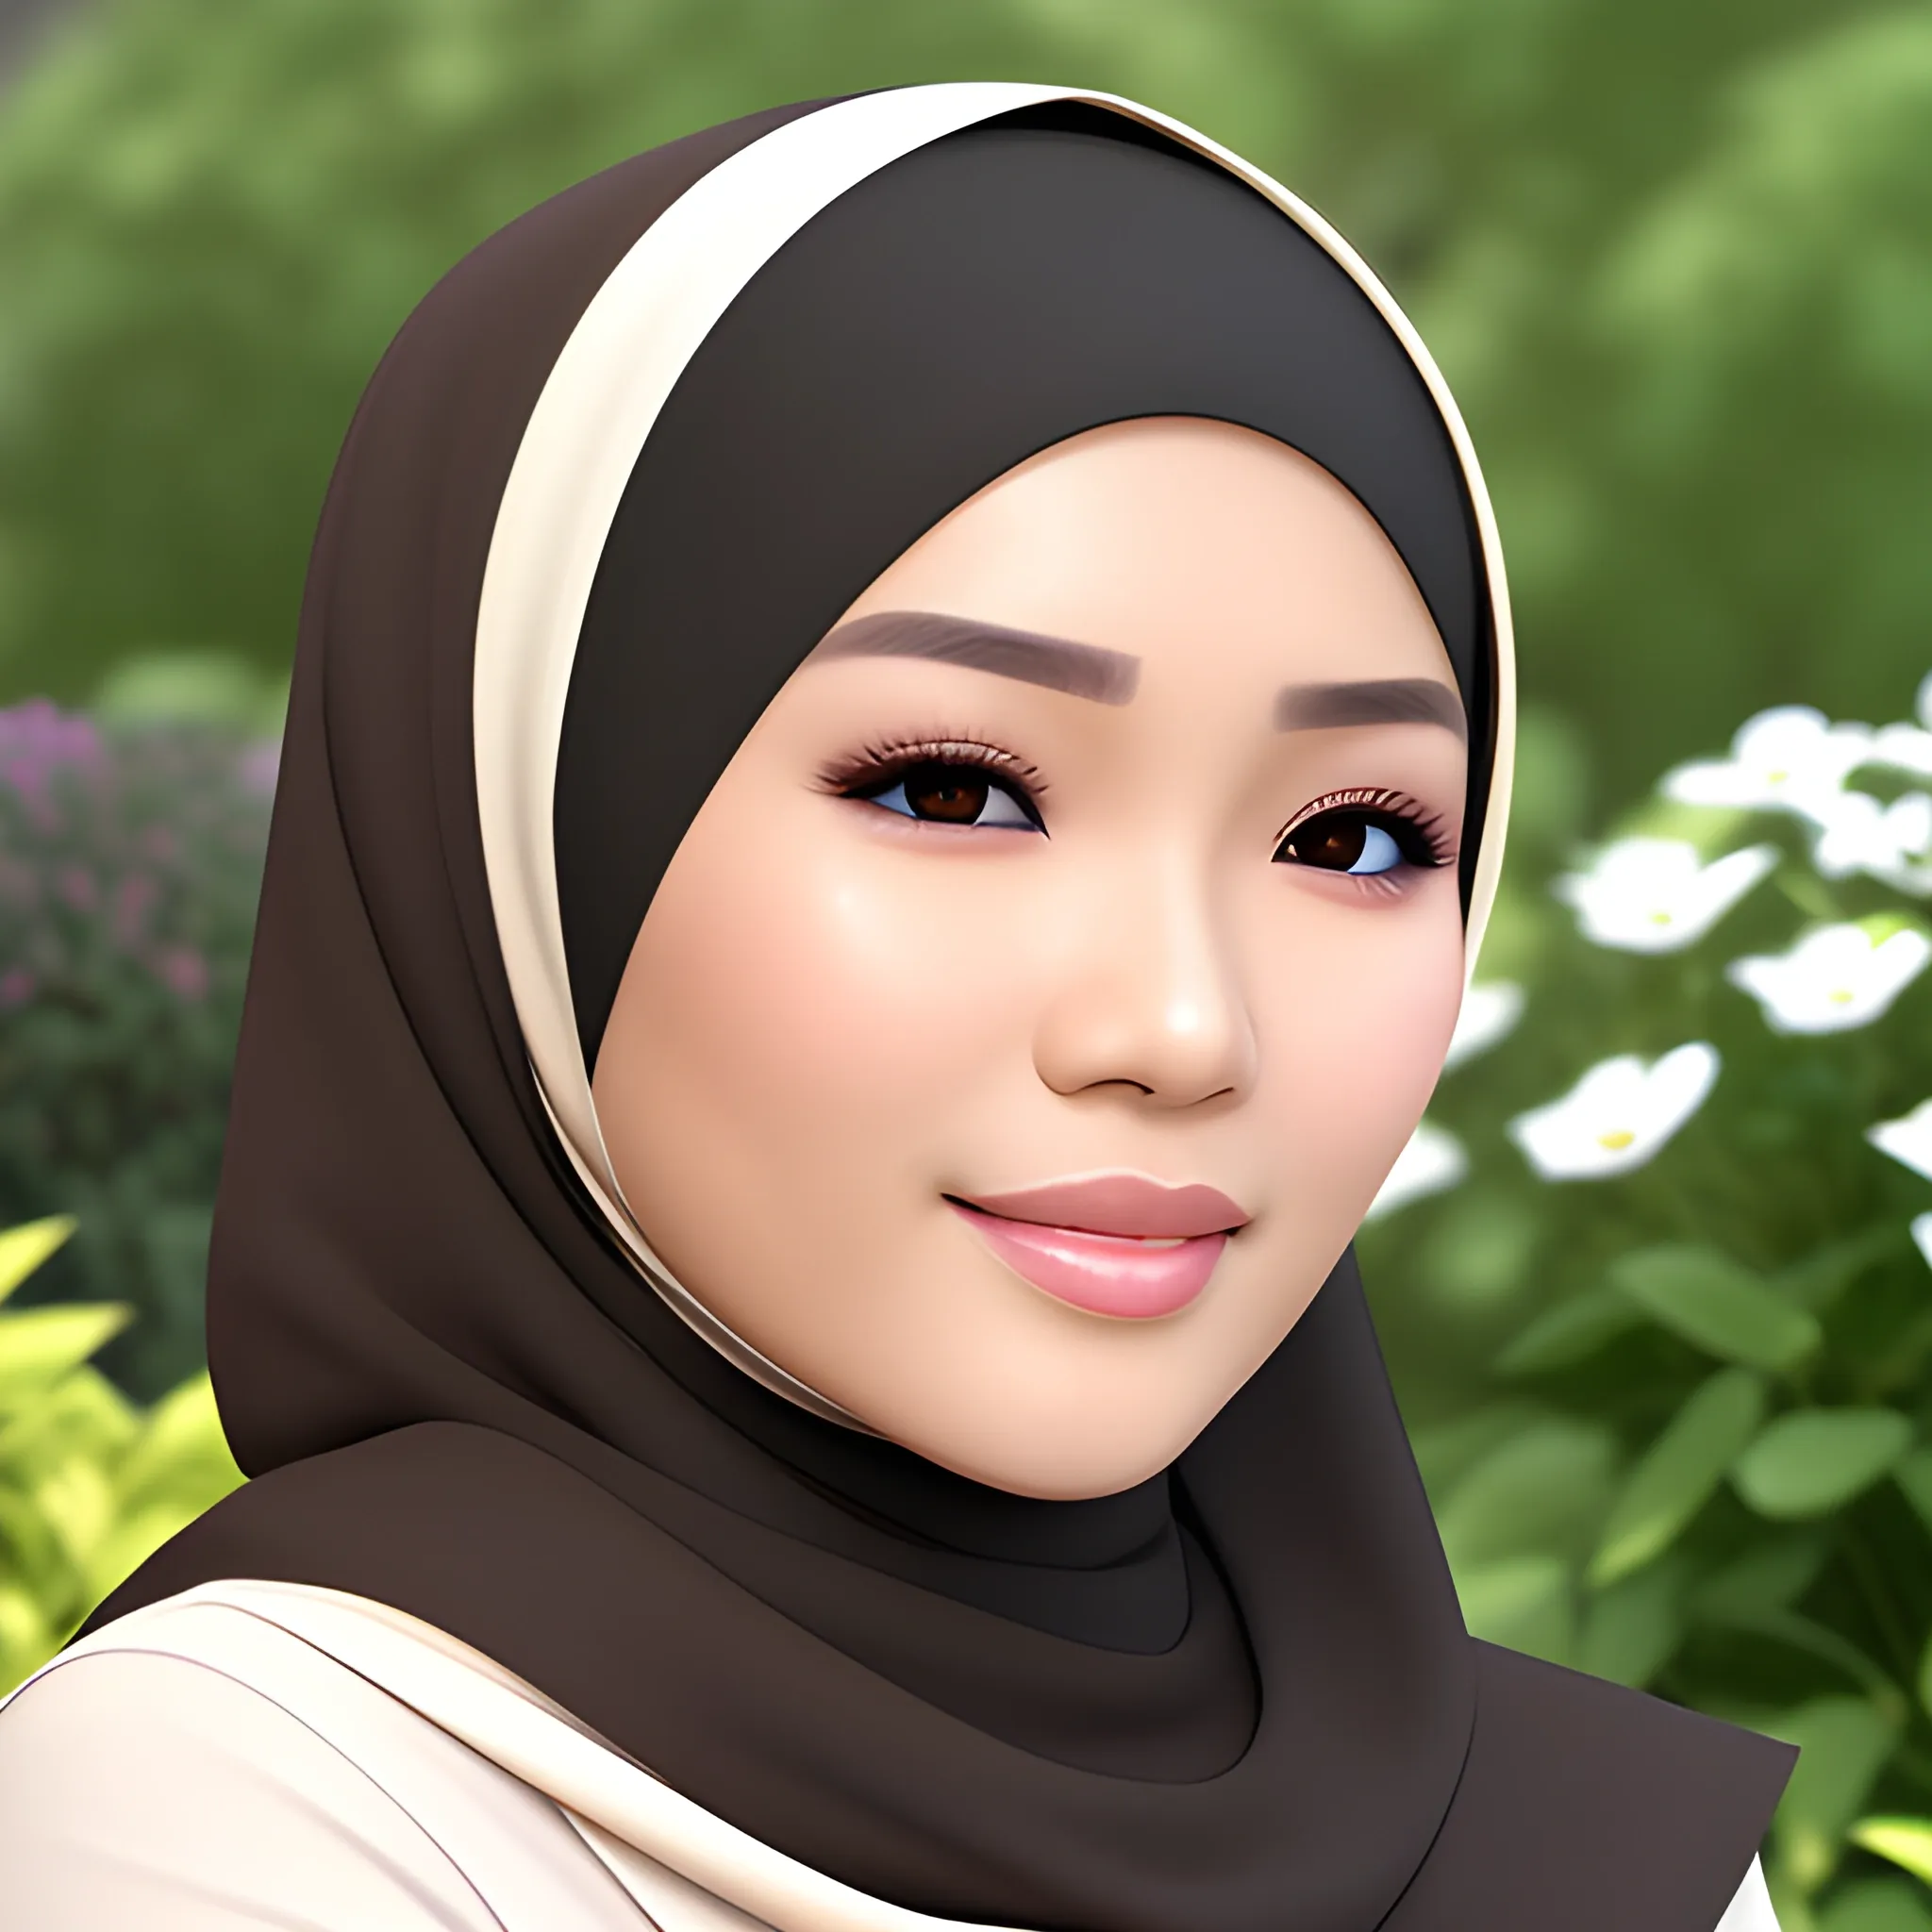 pretty women indonesian, elegant, happy, face detail, sharp nose, black eyes, wearing a brown hijab, white blouse, casual, in the garden, her eyes looking at camera, 4k, 3D